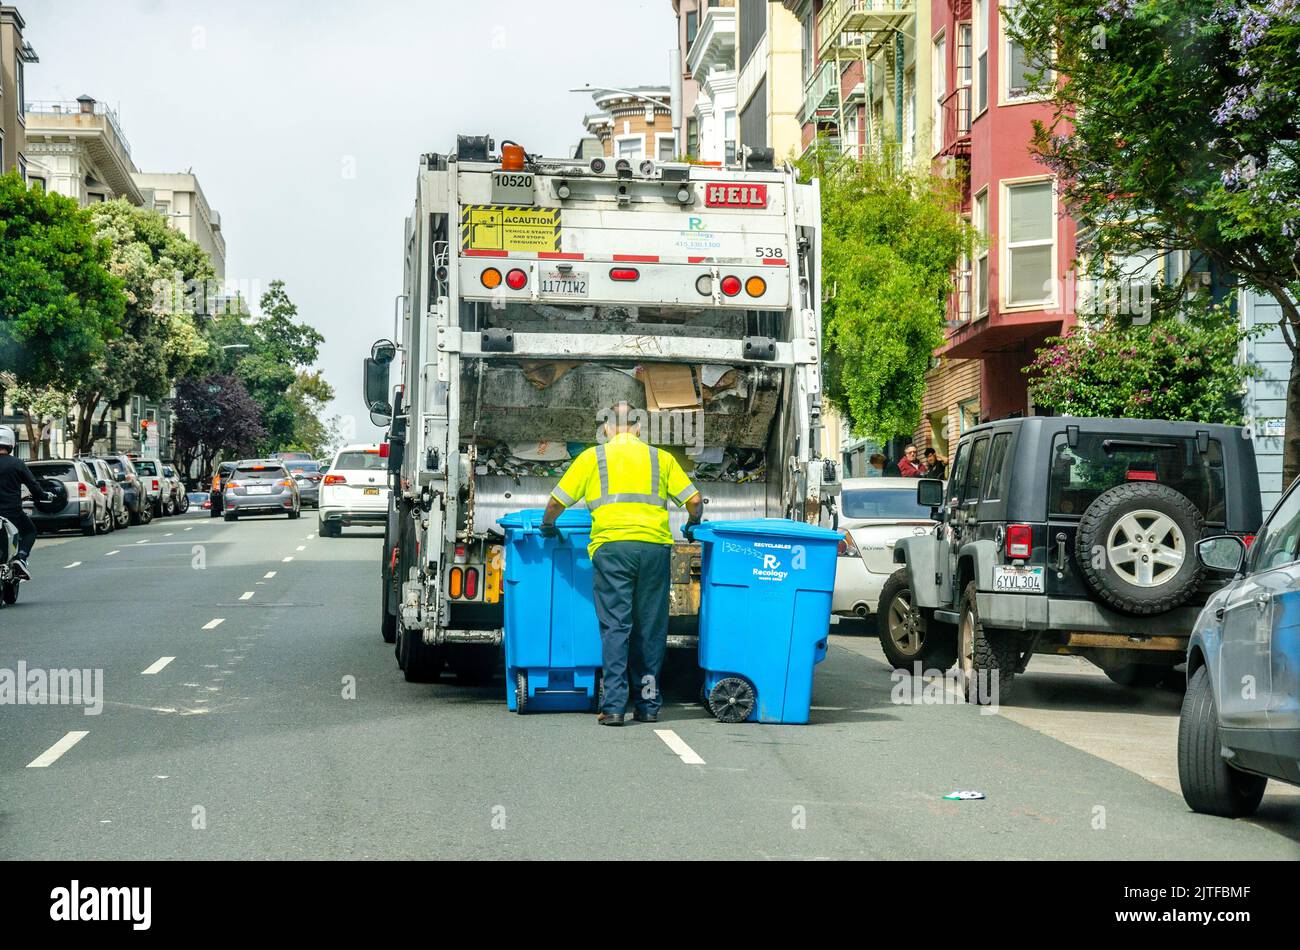 A man empties blue wheelie bins containing waste paper into the back of a garbage truck or bin lorry on a street in San Francisco, California, USA Stock Photo